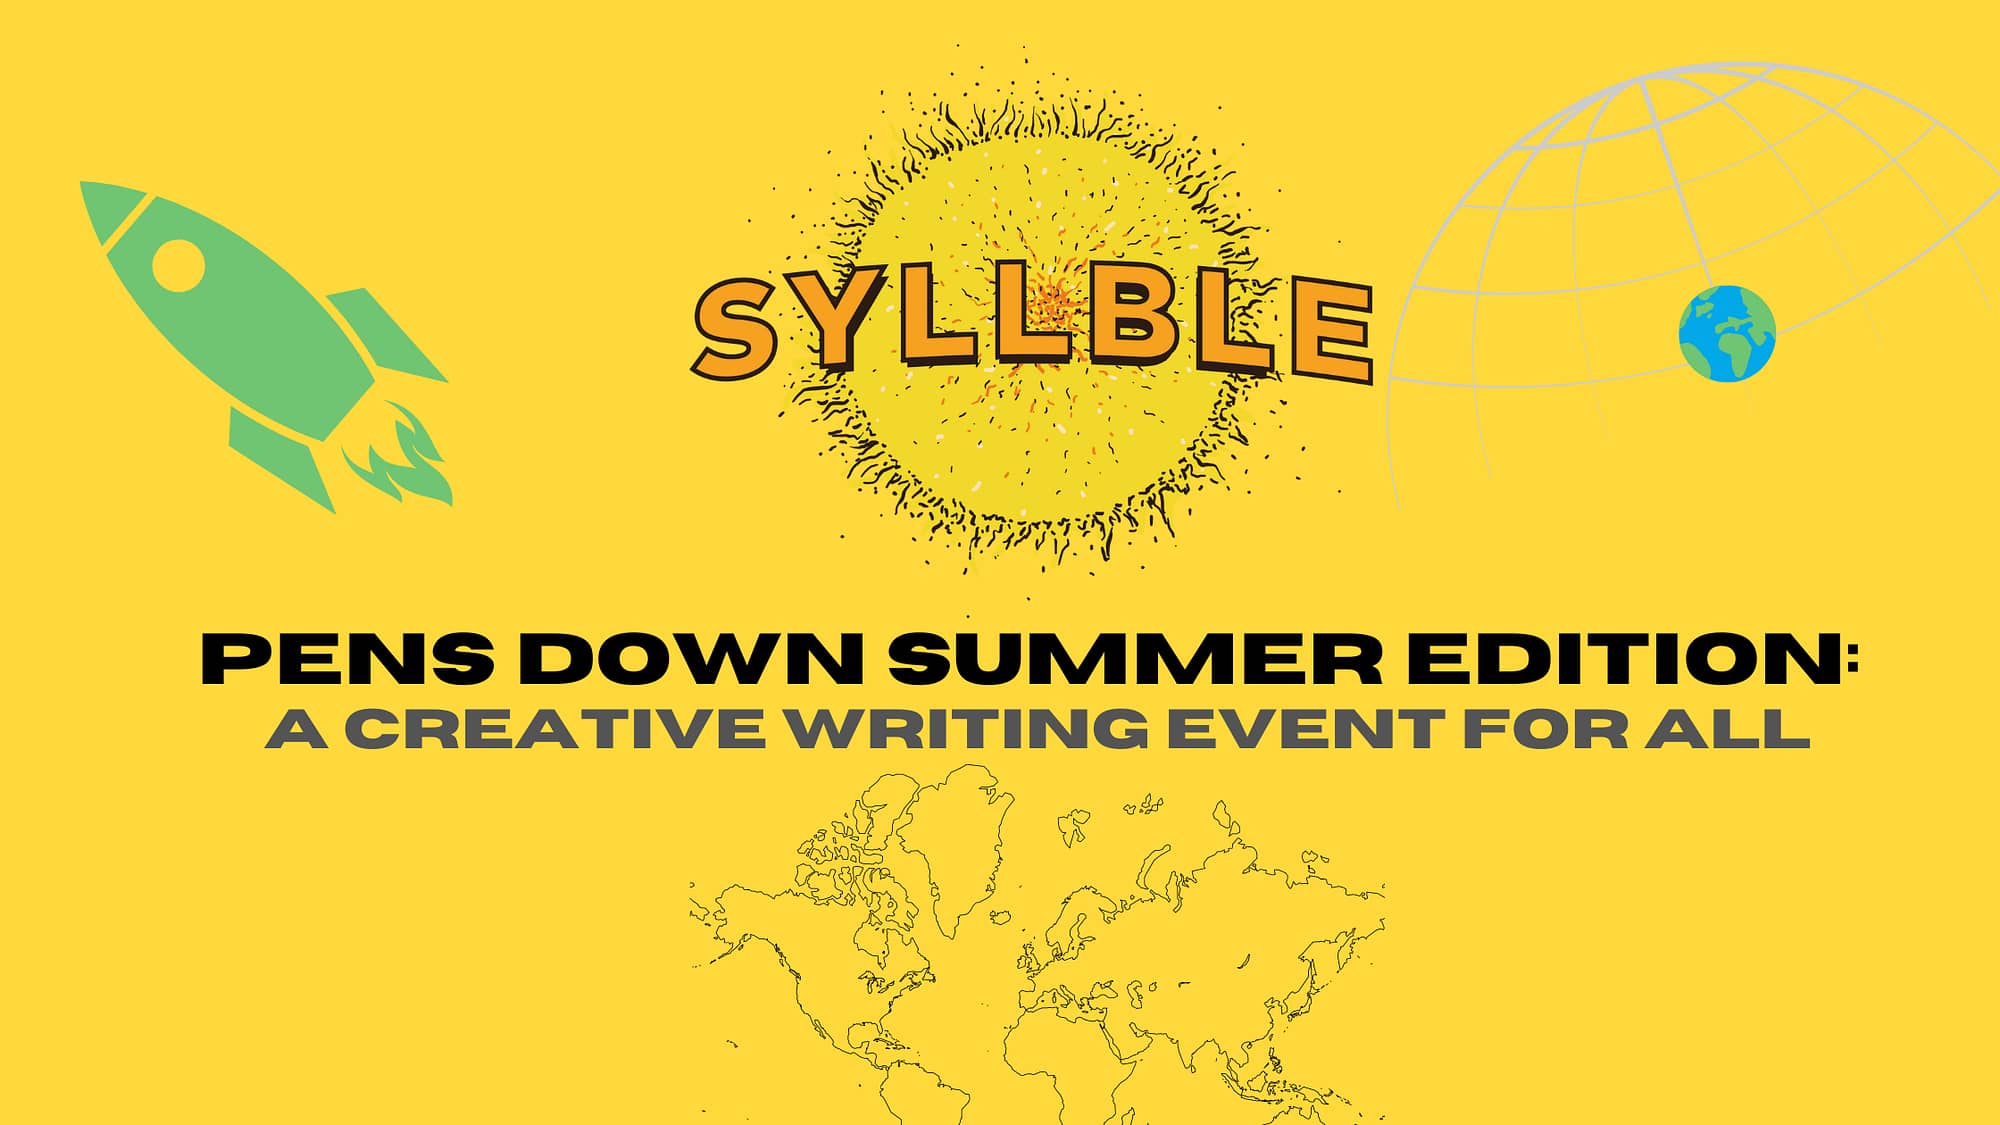 Pens Down Summer Edition: A Creative Writing Event for All